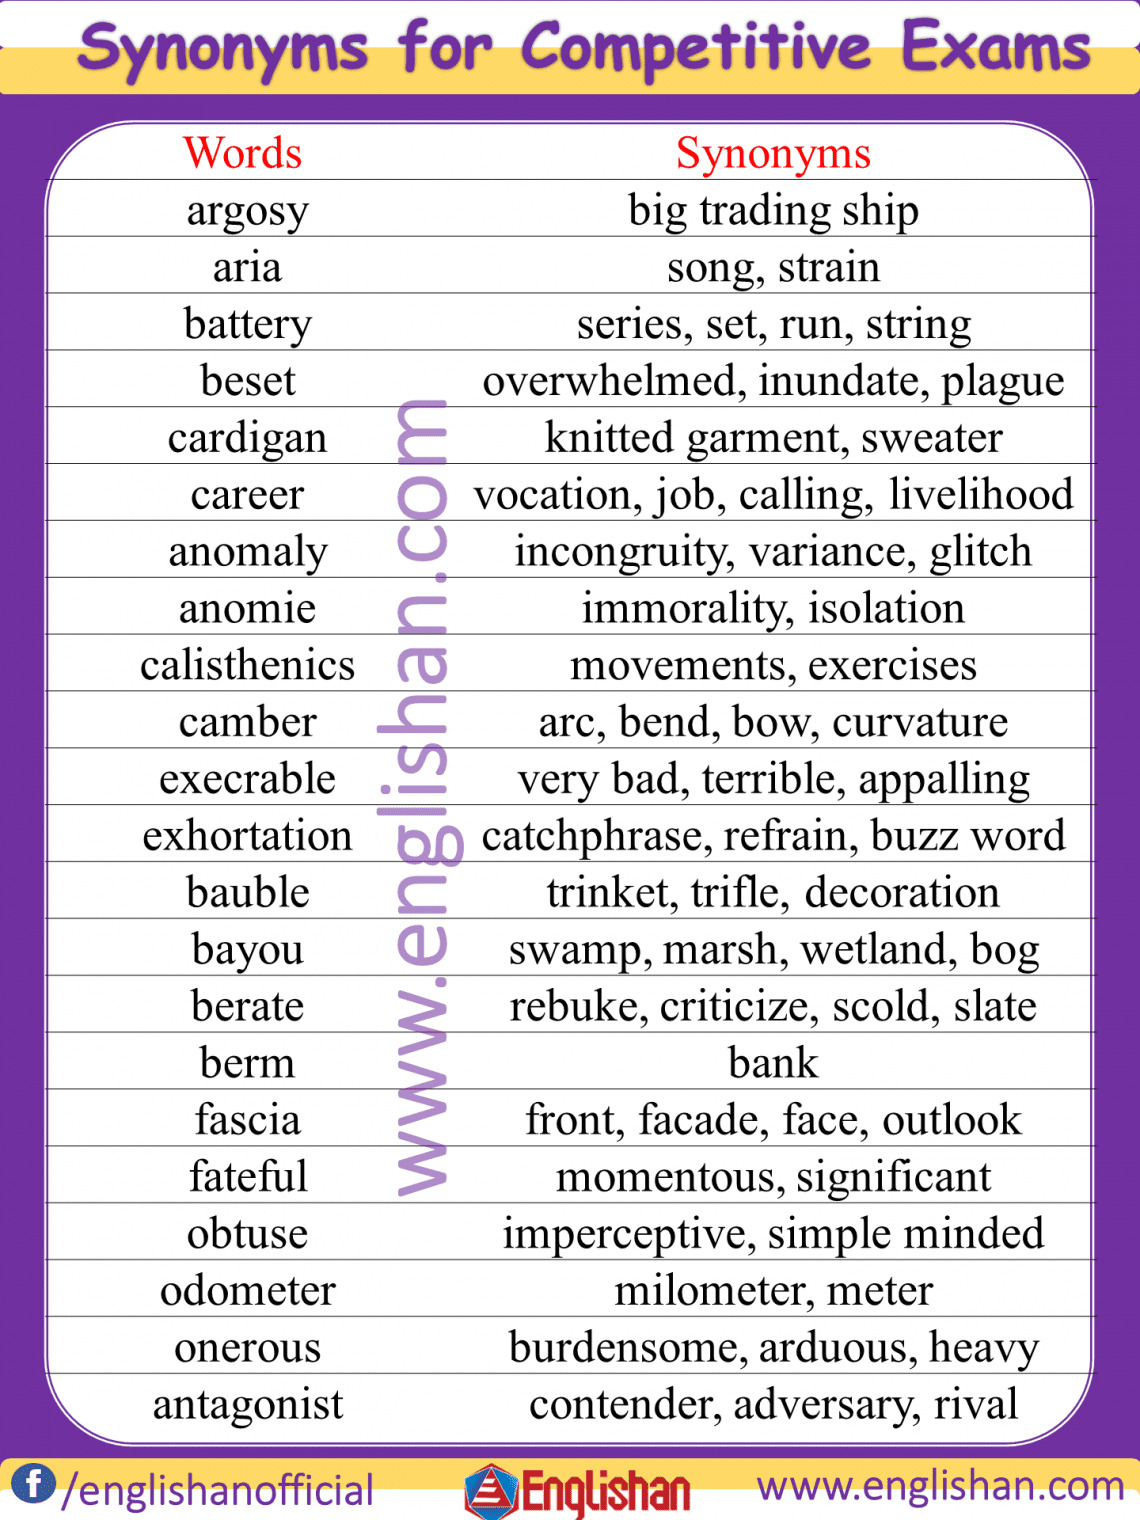 vanquish definition synonyms